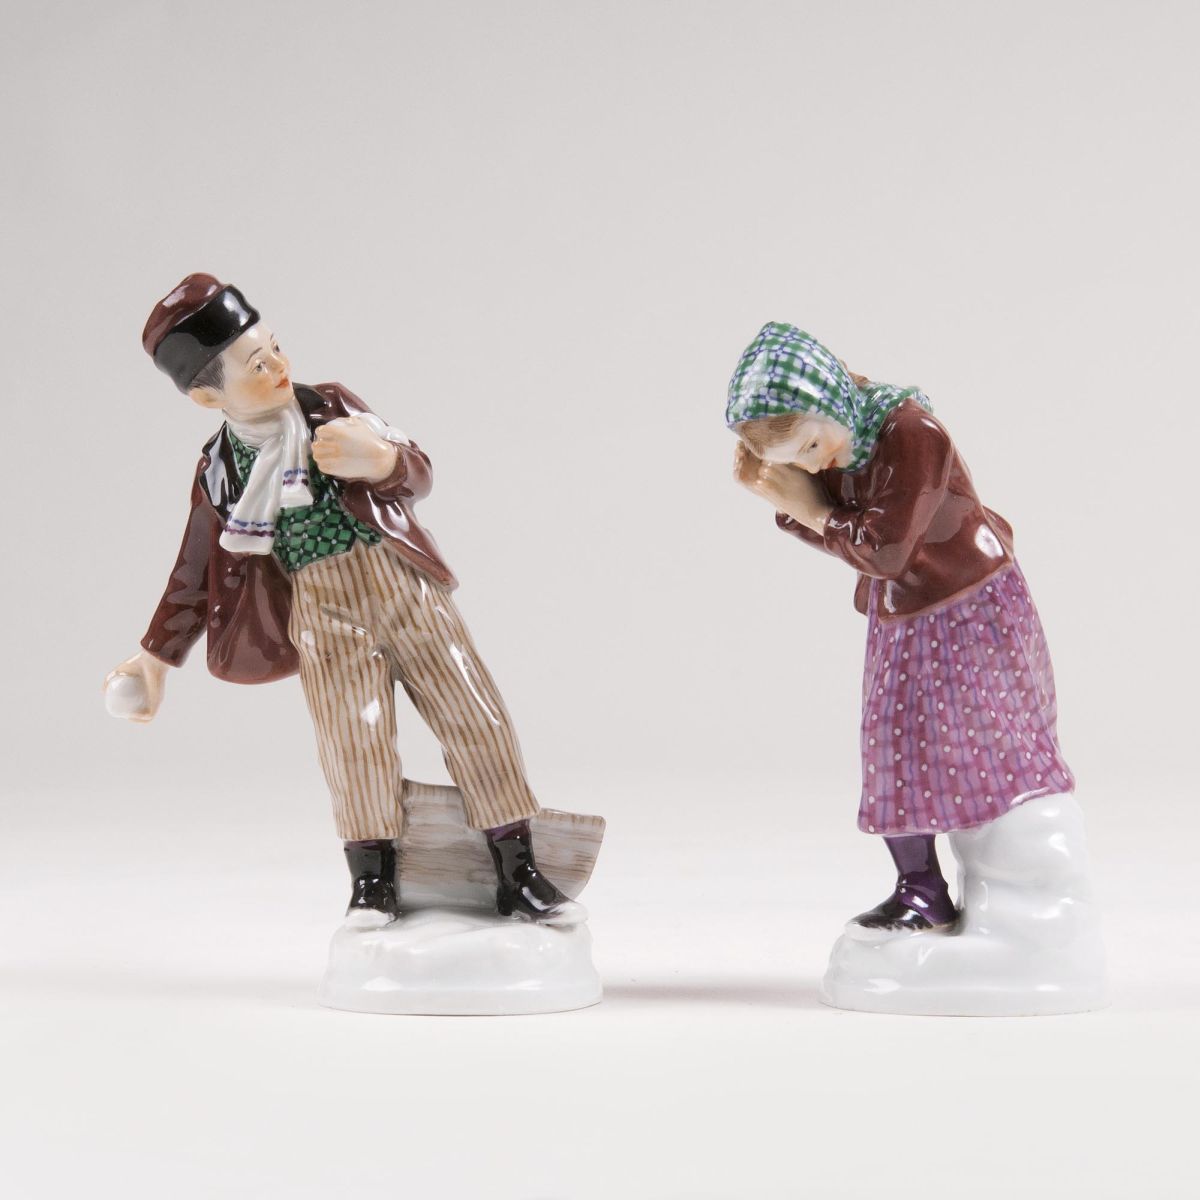 A Pair of Figures 'Boy throwing a snowball' and 'Girl fending off a snowball'